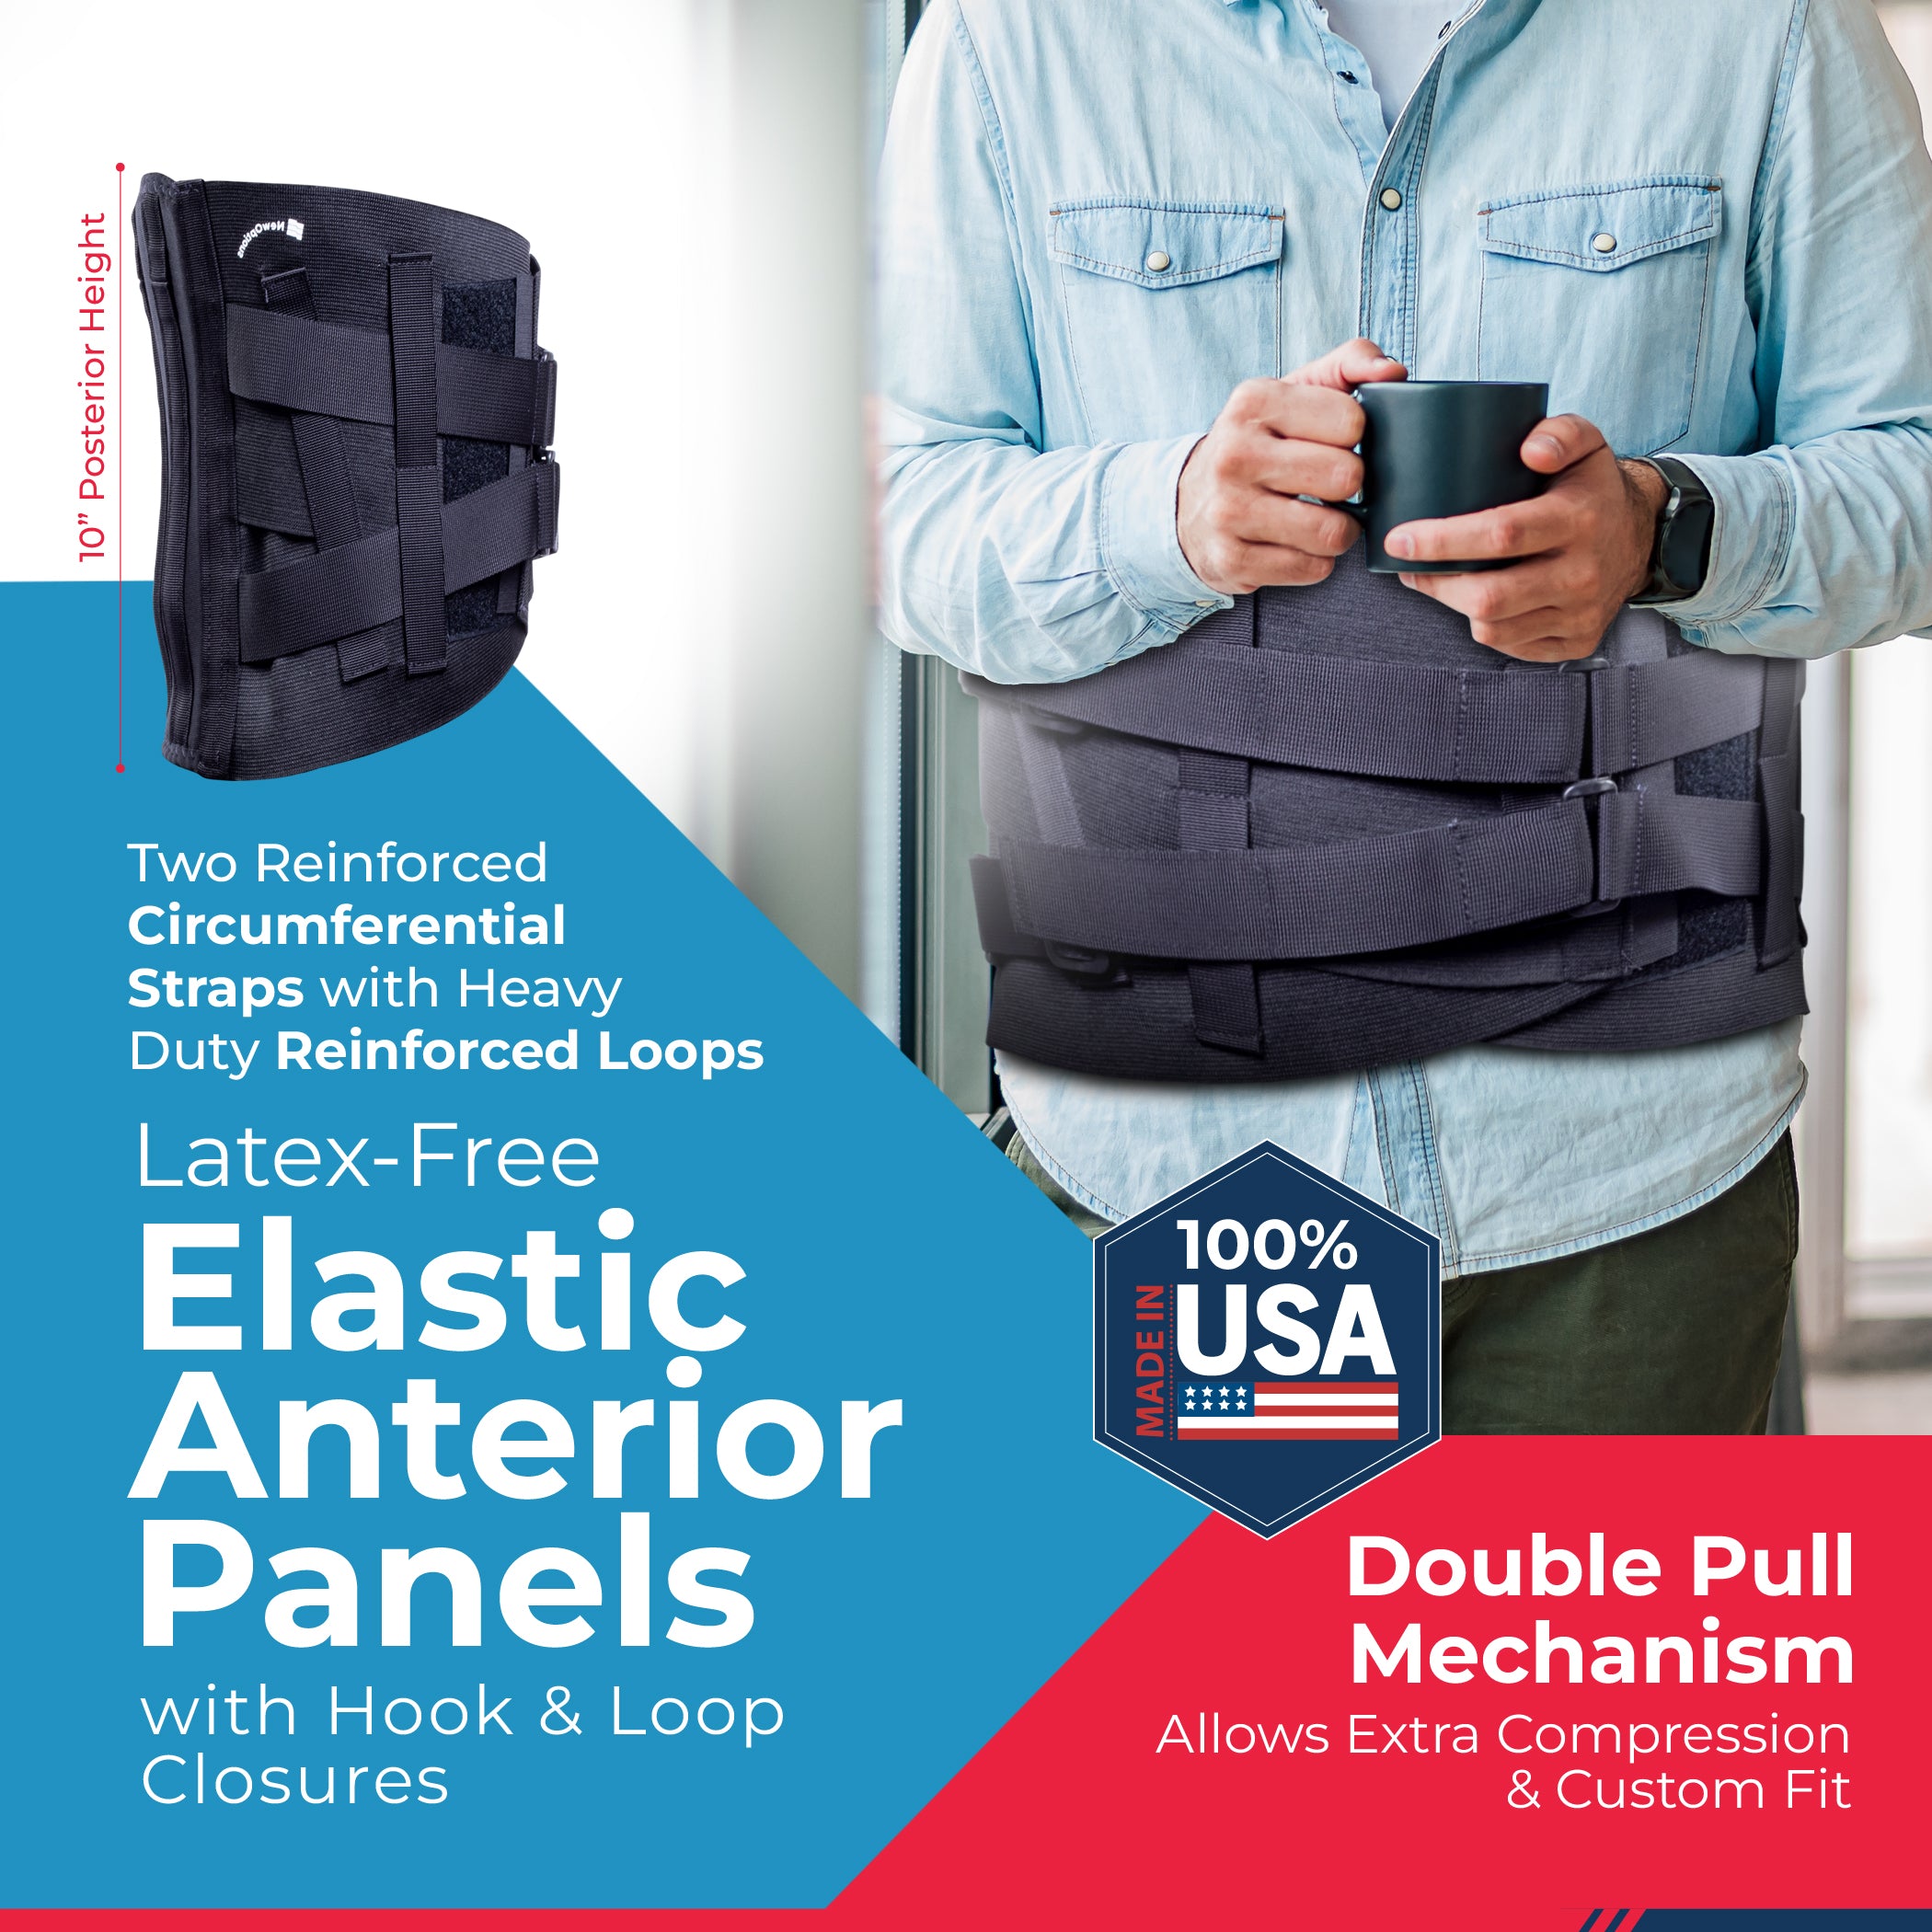 Home Aide Pro Comfort Universal Lumbar Support Back Brace – Ample Medical